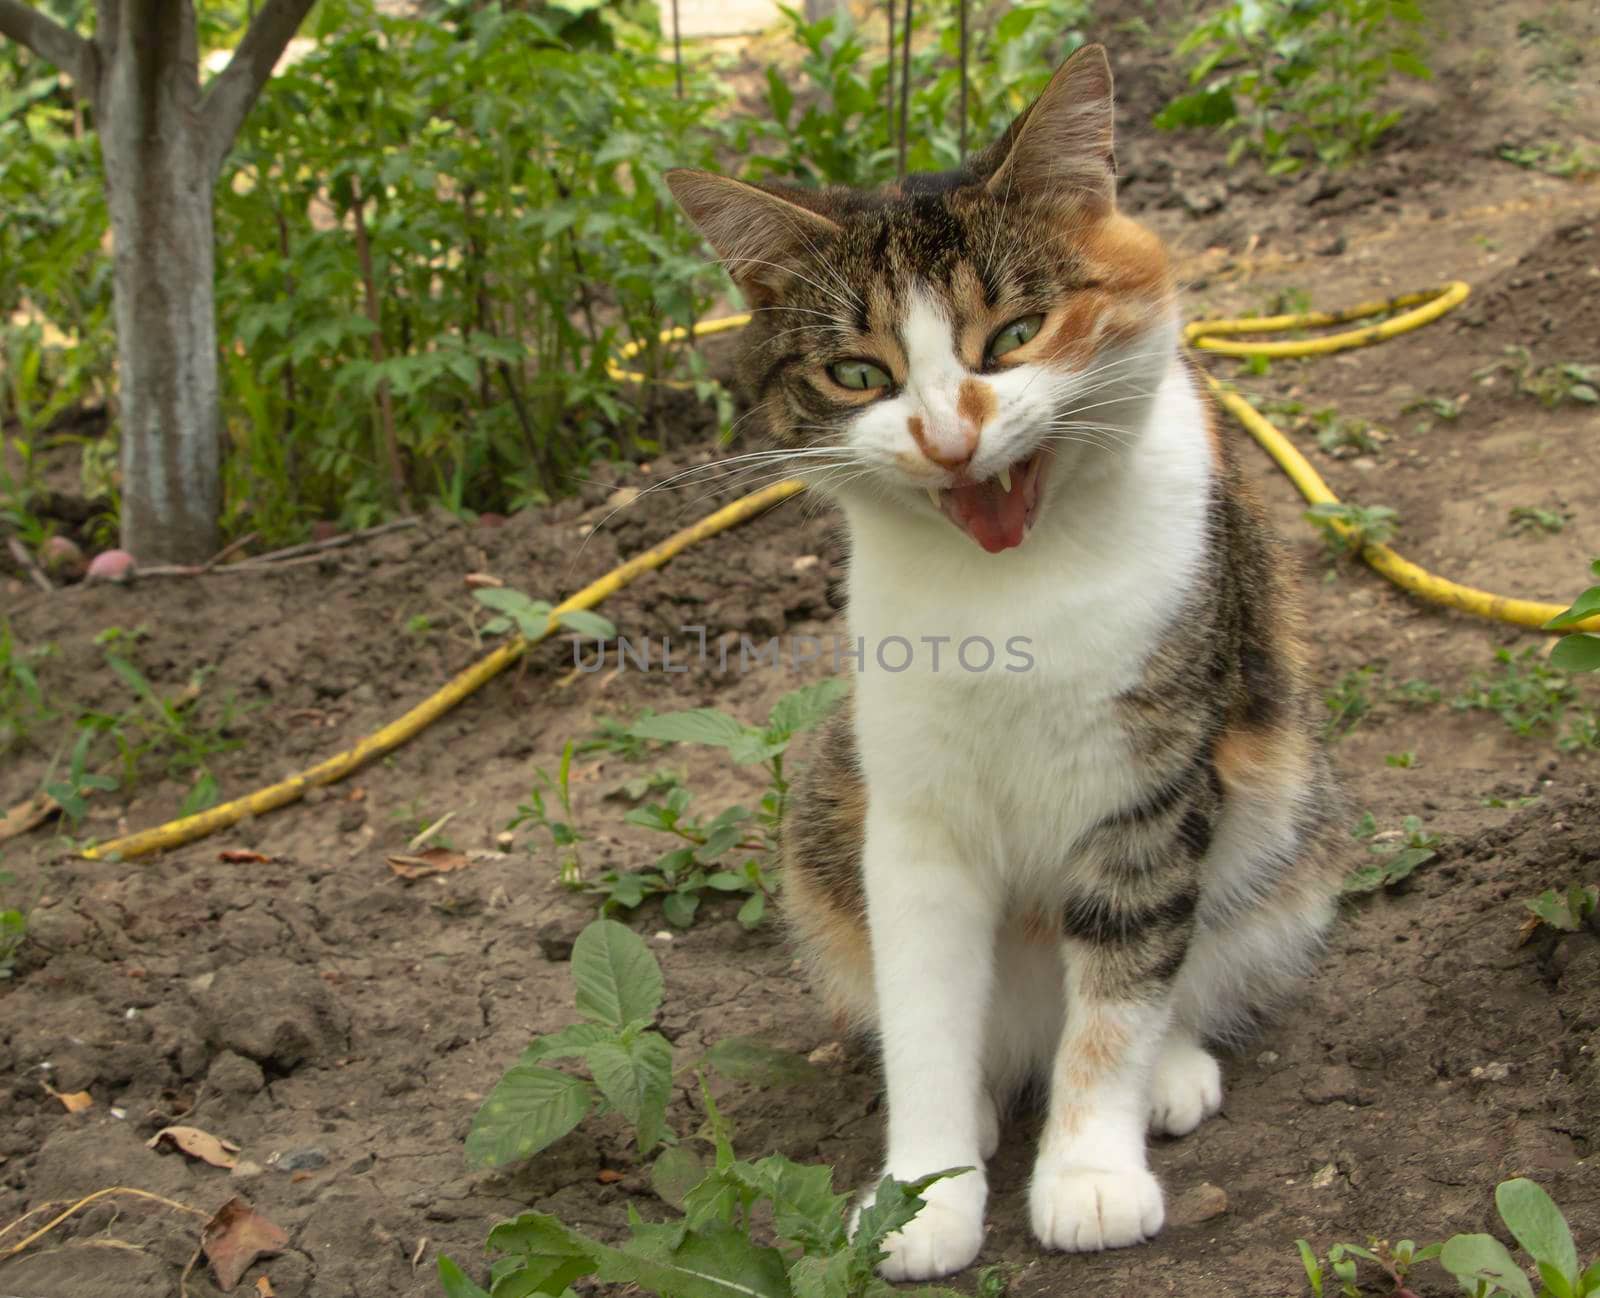 An aggressive cat with an open mouth by Mindru